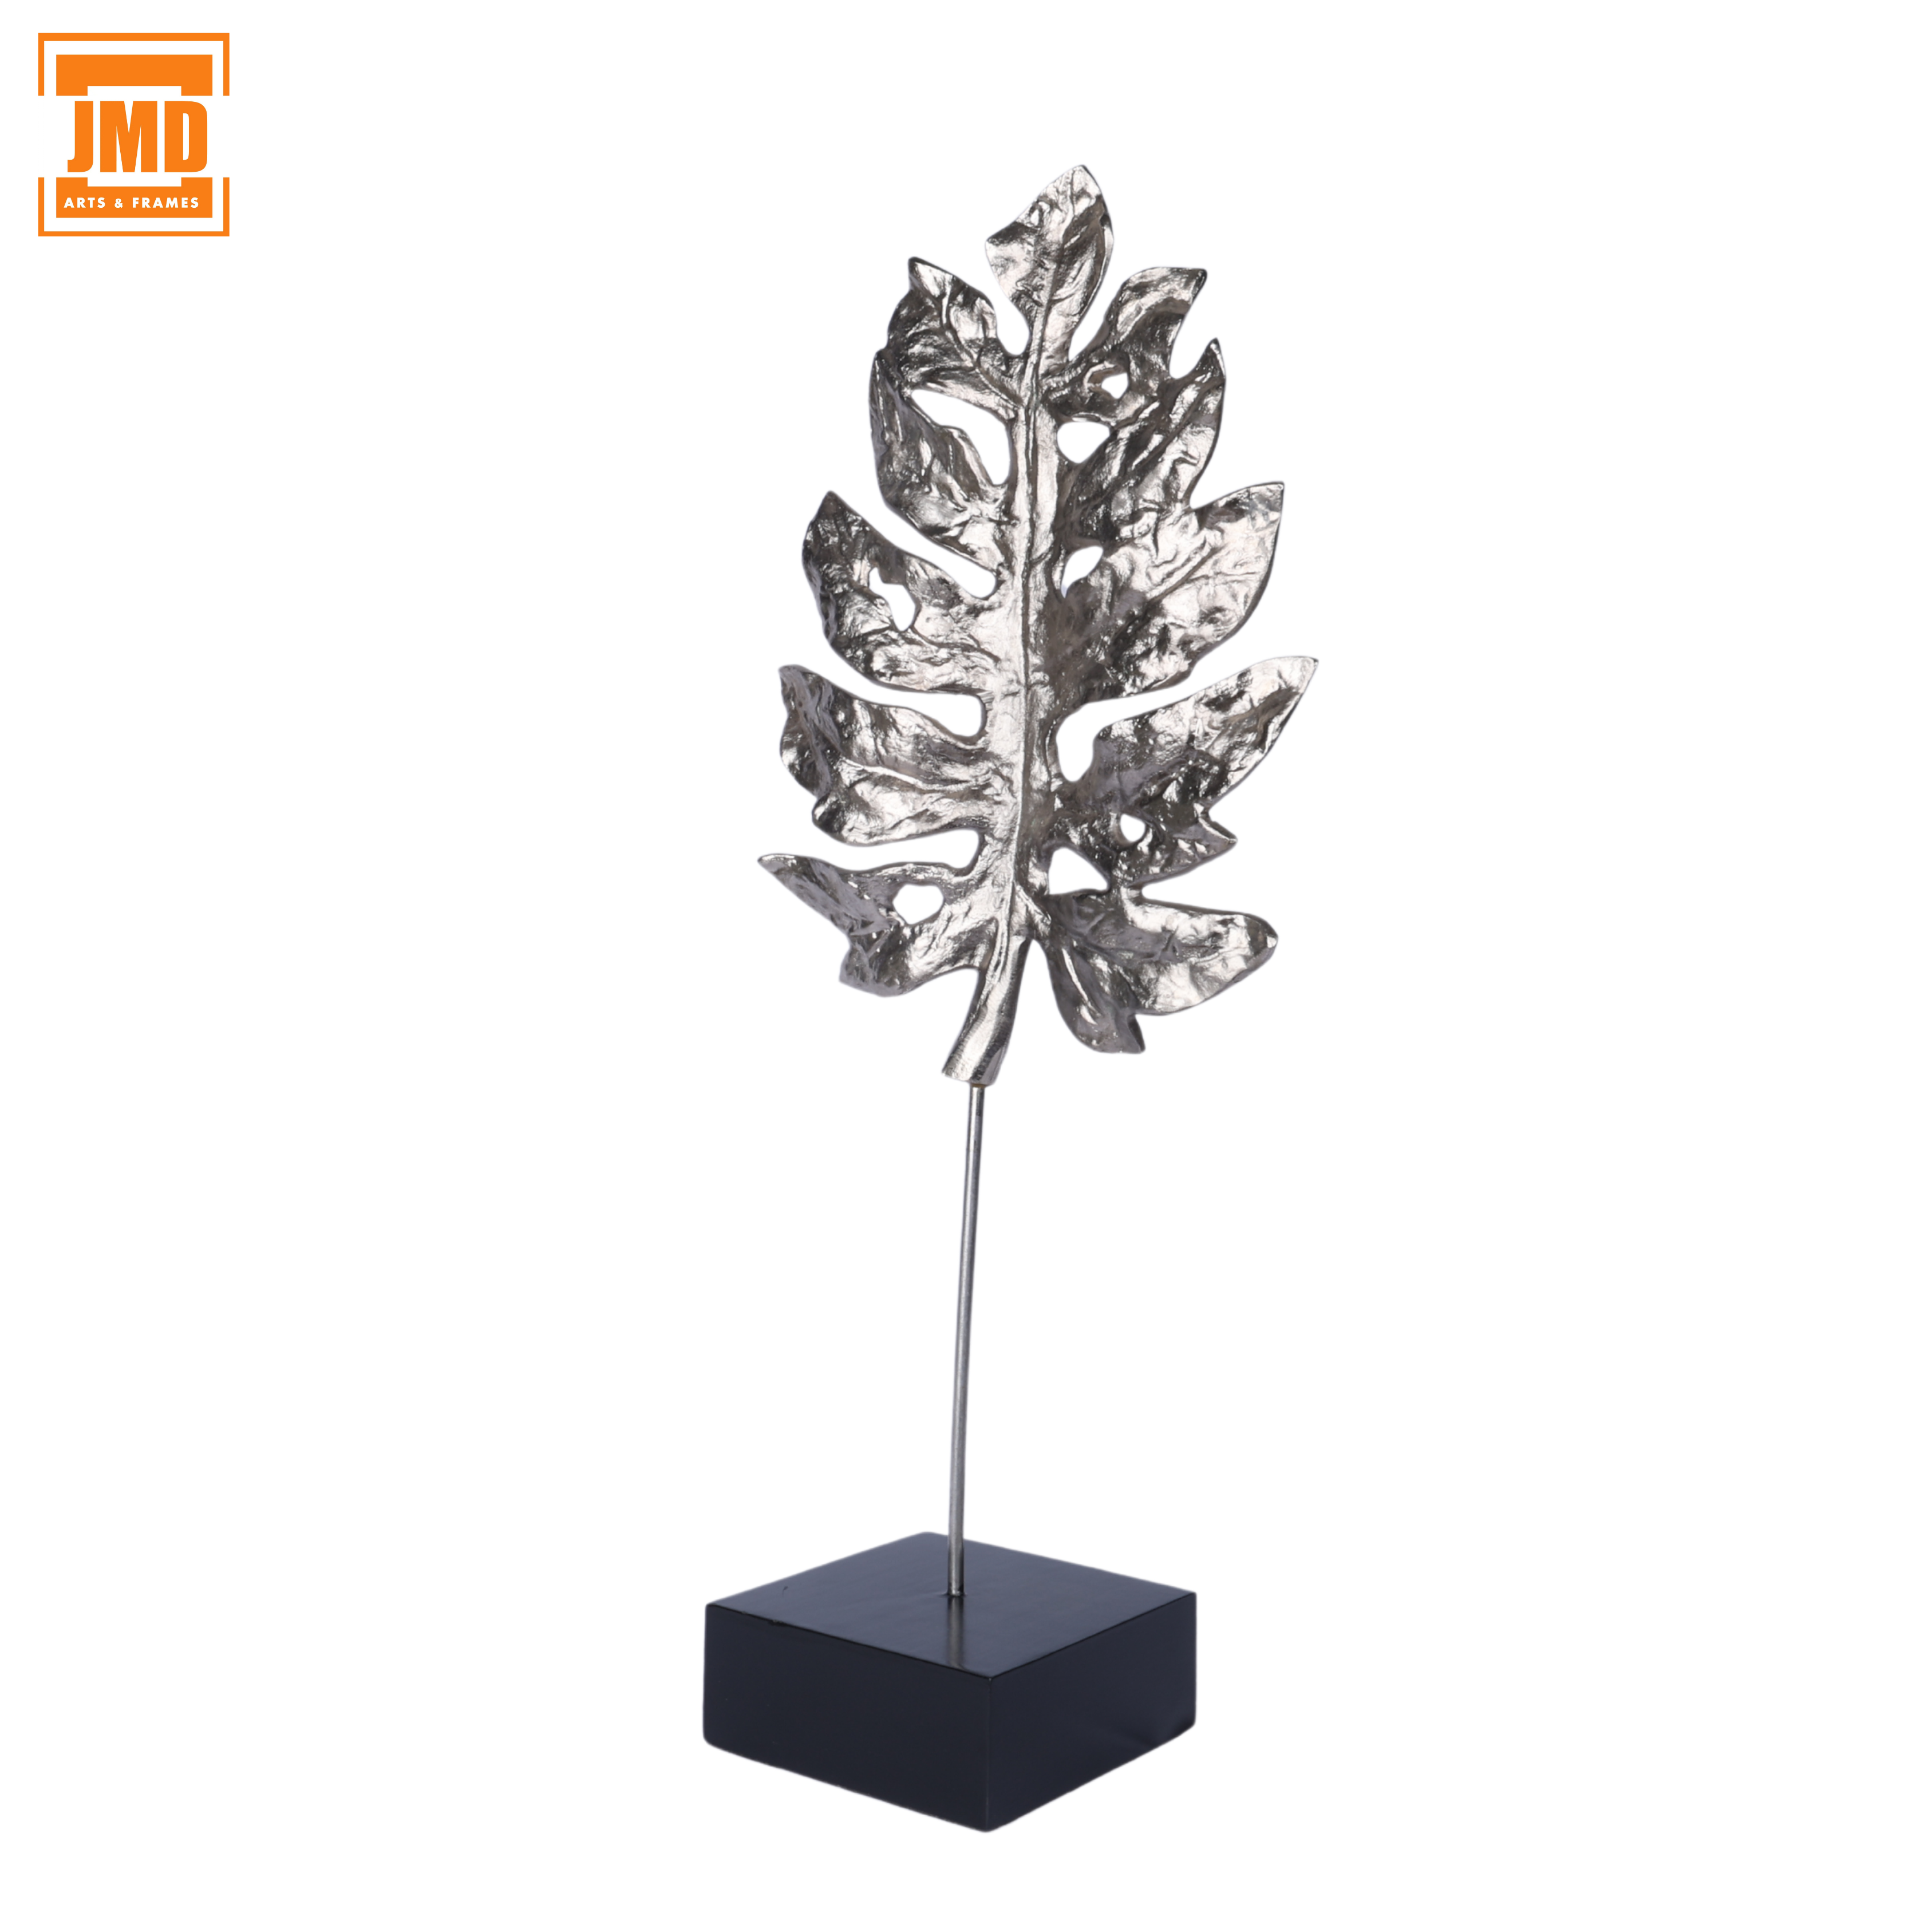 SILVER LEAF ON STAND